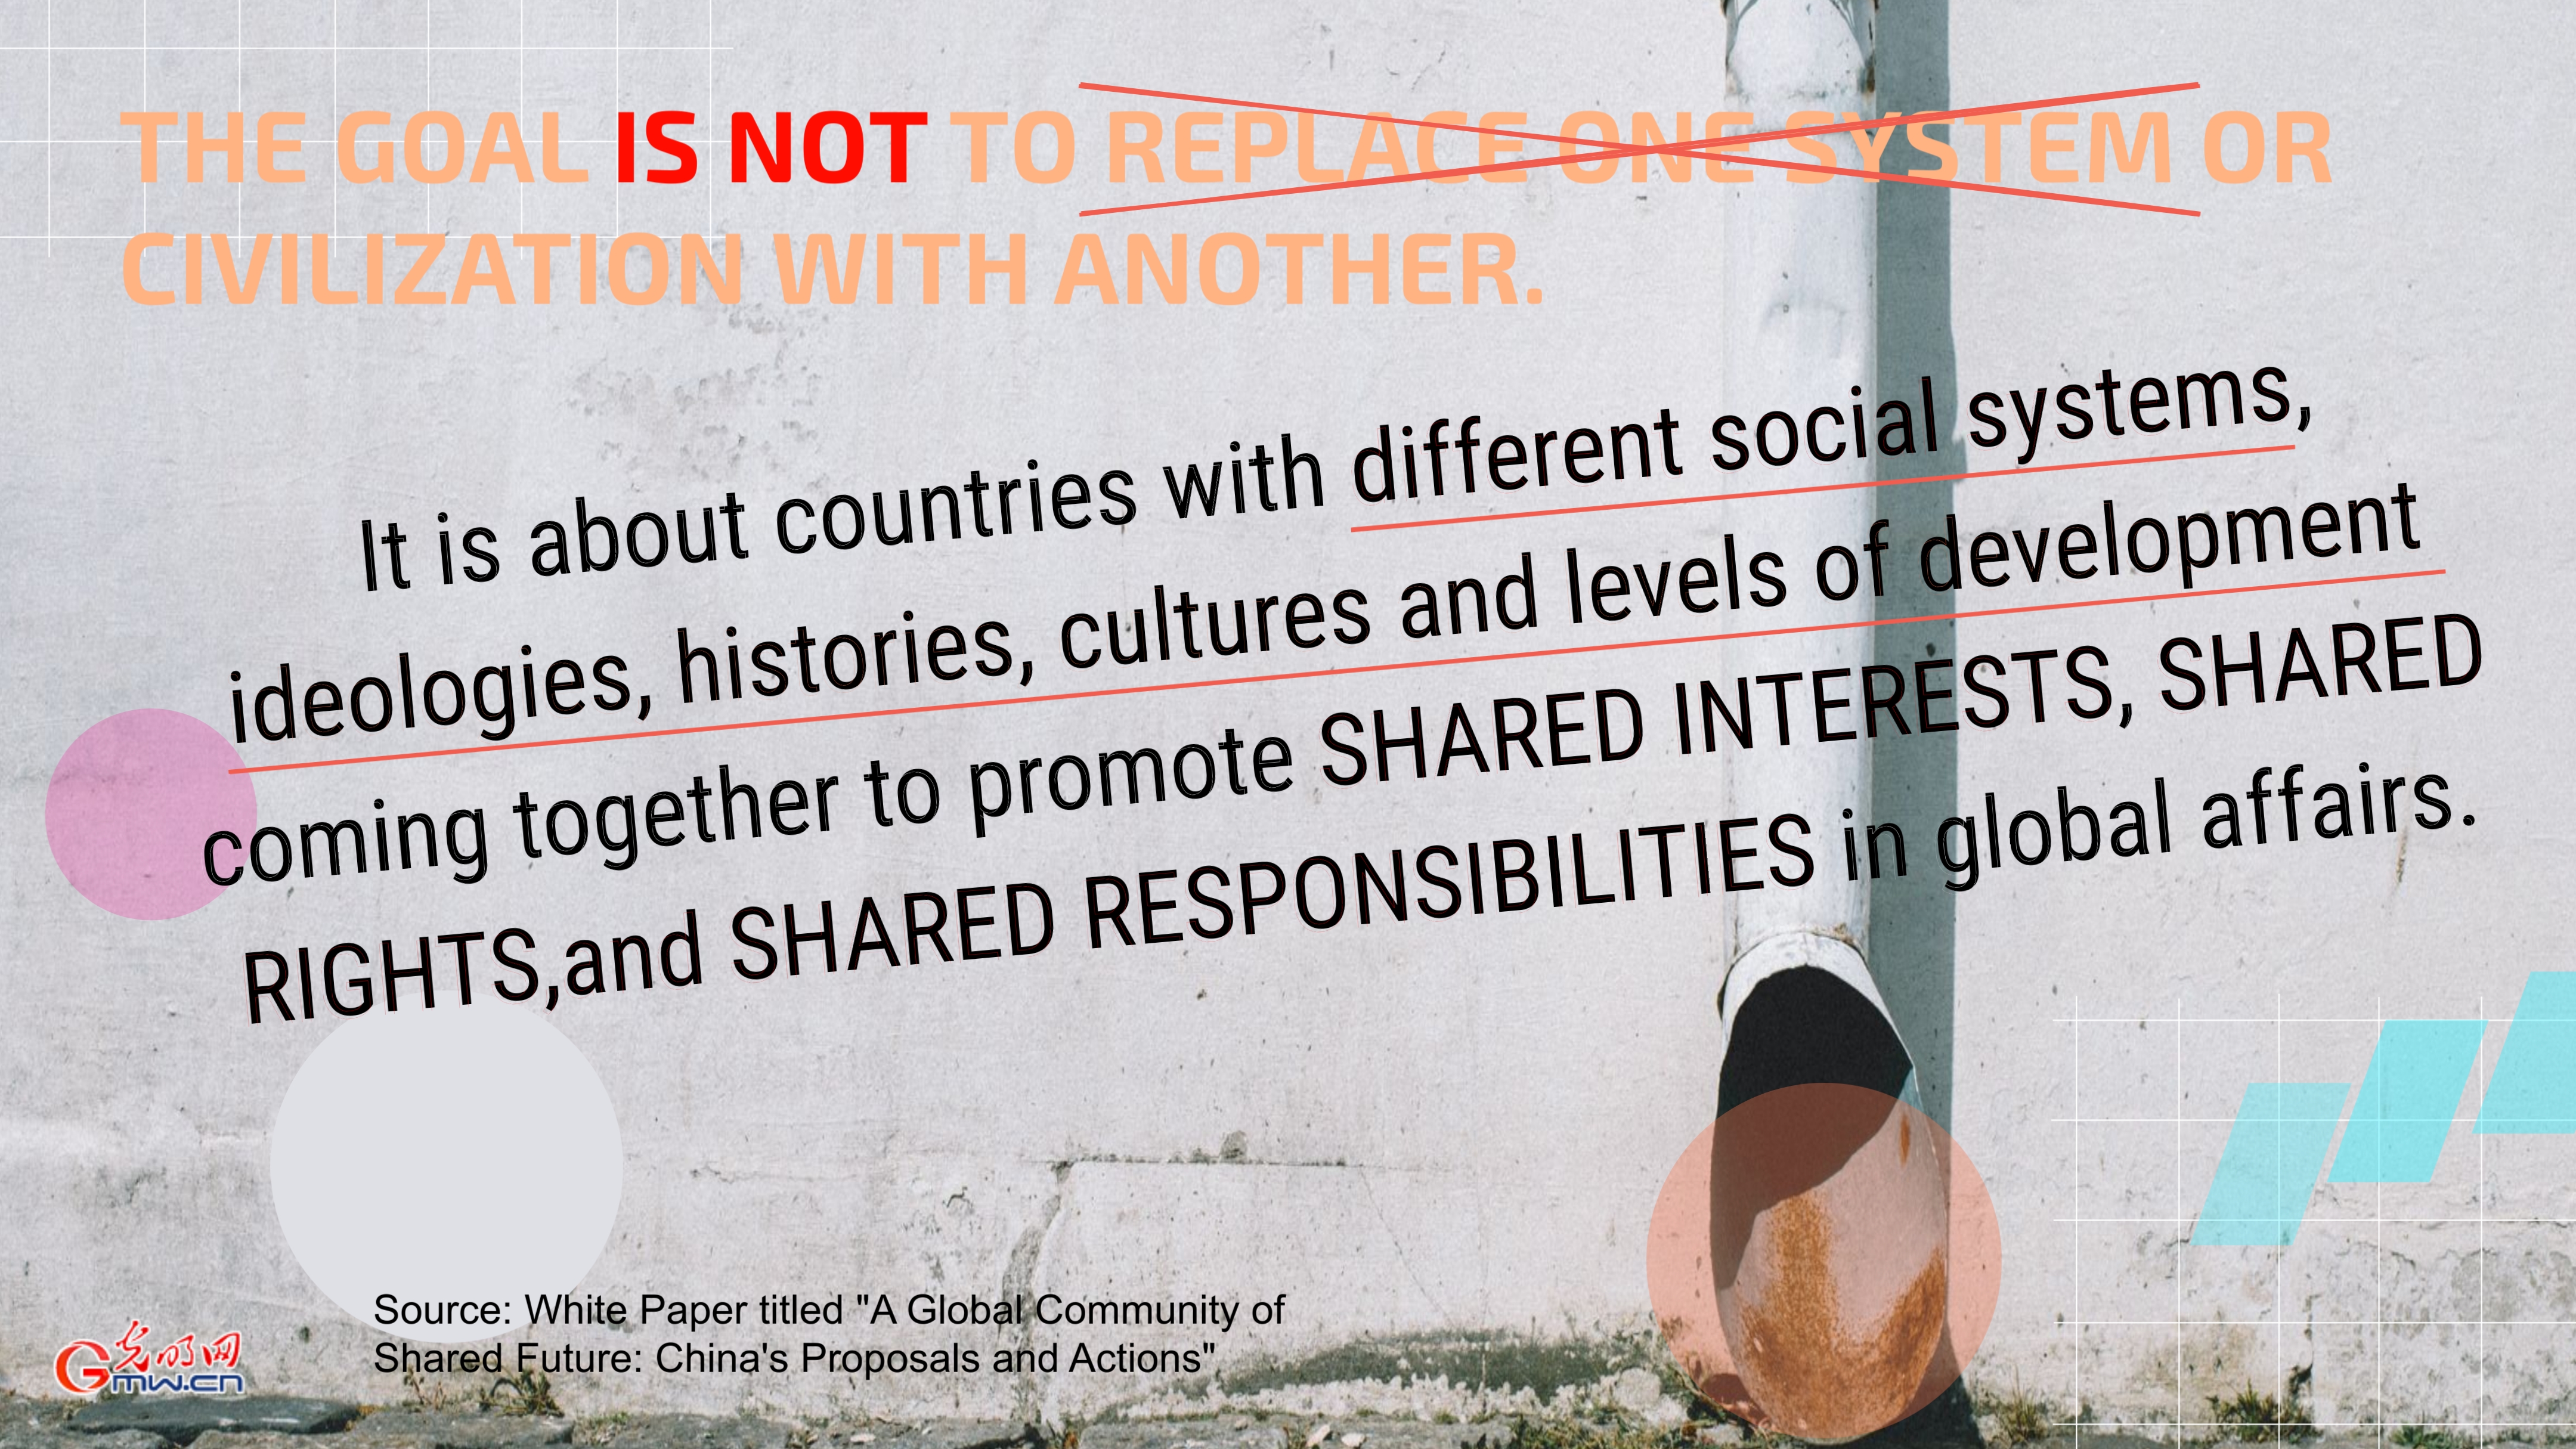 Posters | China's White Paper Responds to the Call of the Times and Proposes a Blueprint for a Global Community of Shared Future